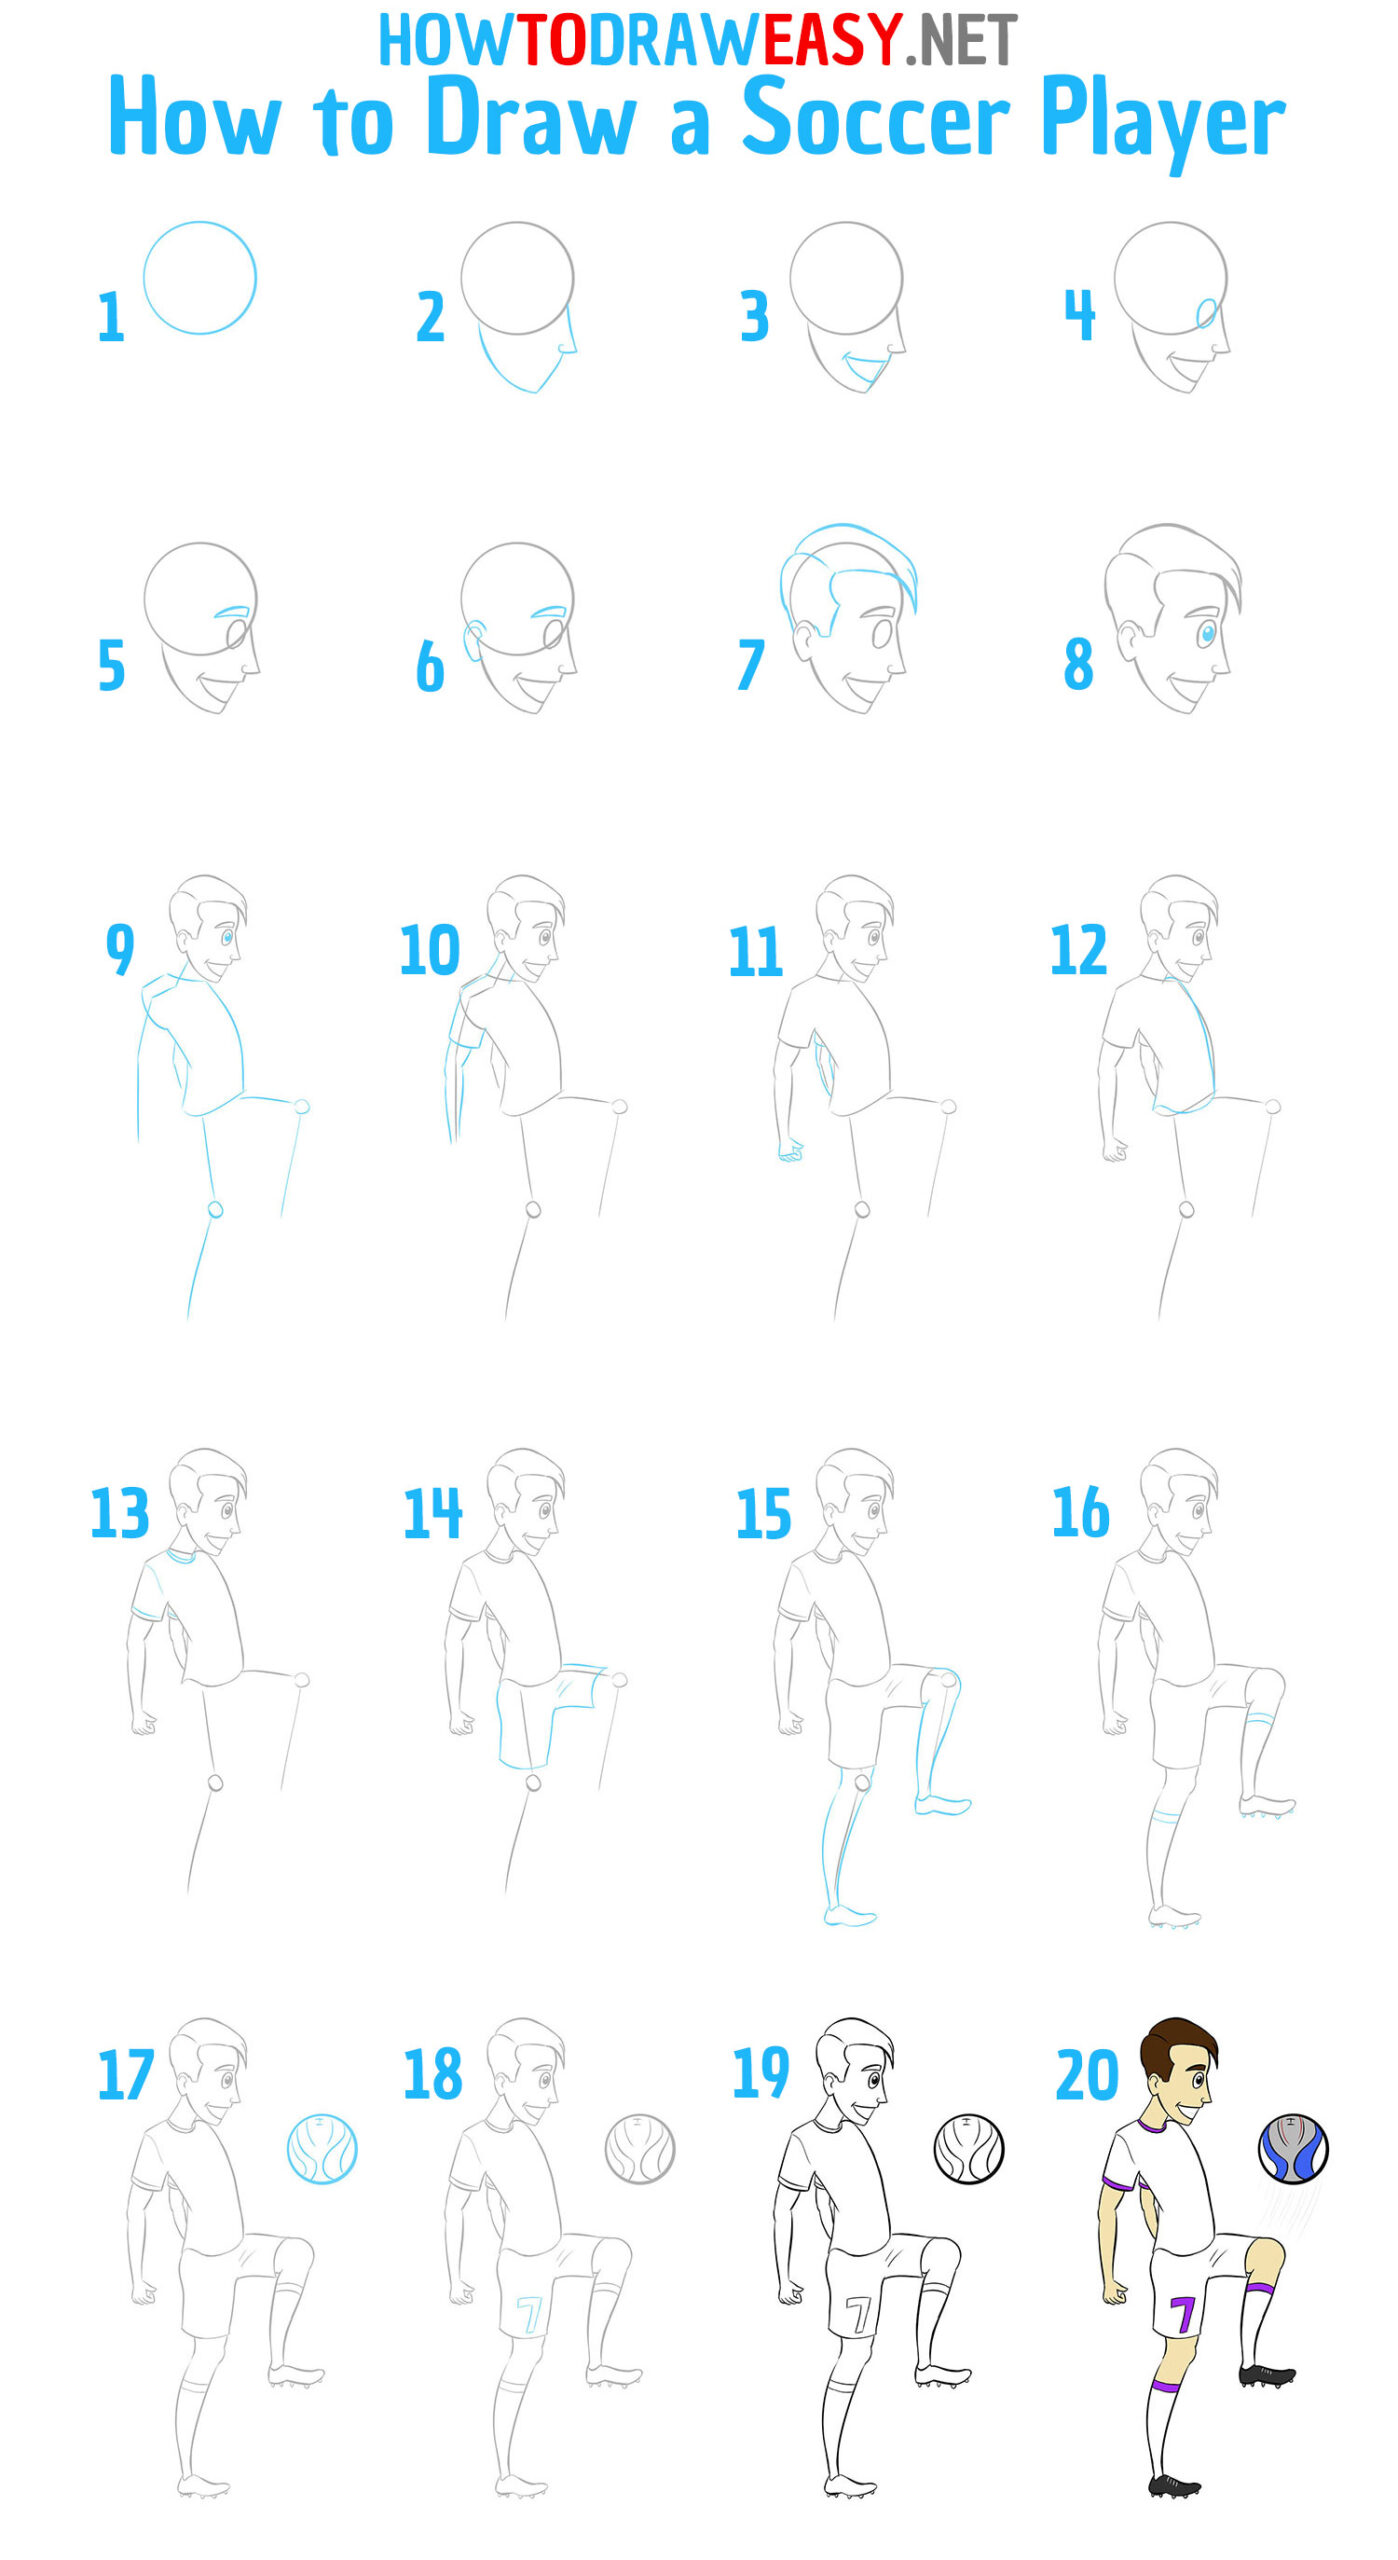 How to Draw a Soccer Player Step by Step